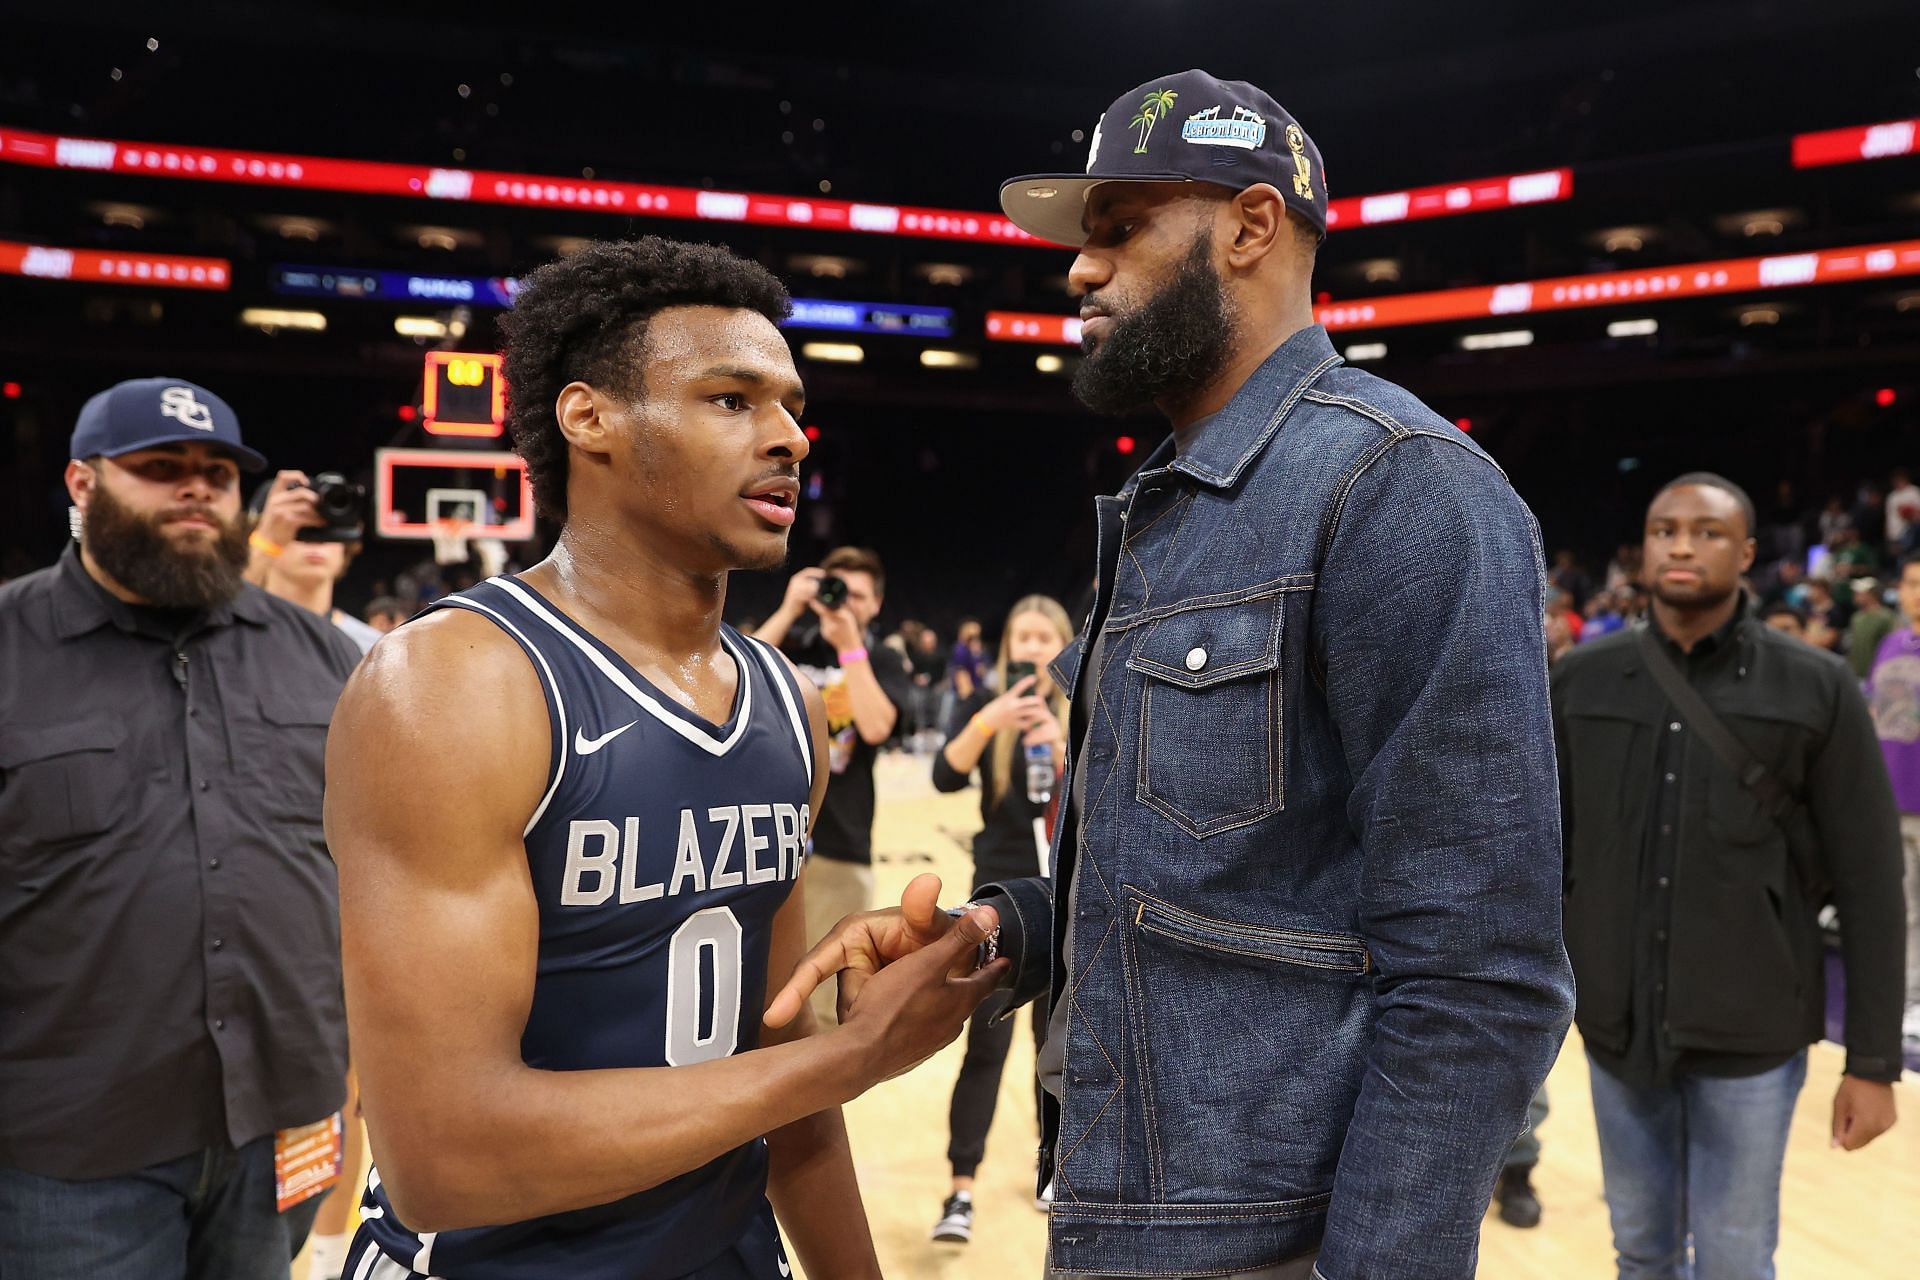 Bronny James of the Sierra Canyon Trailblazers is greeted by his father, NBA star LeBron James.